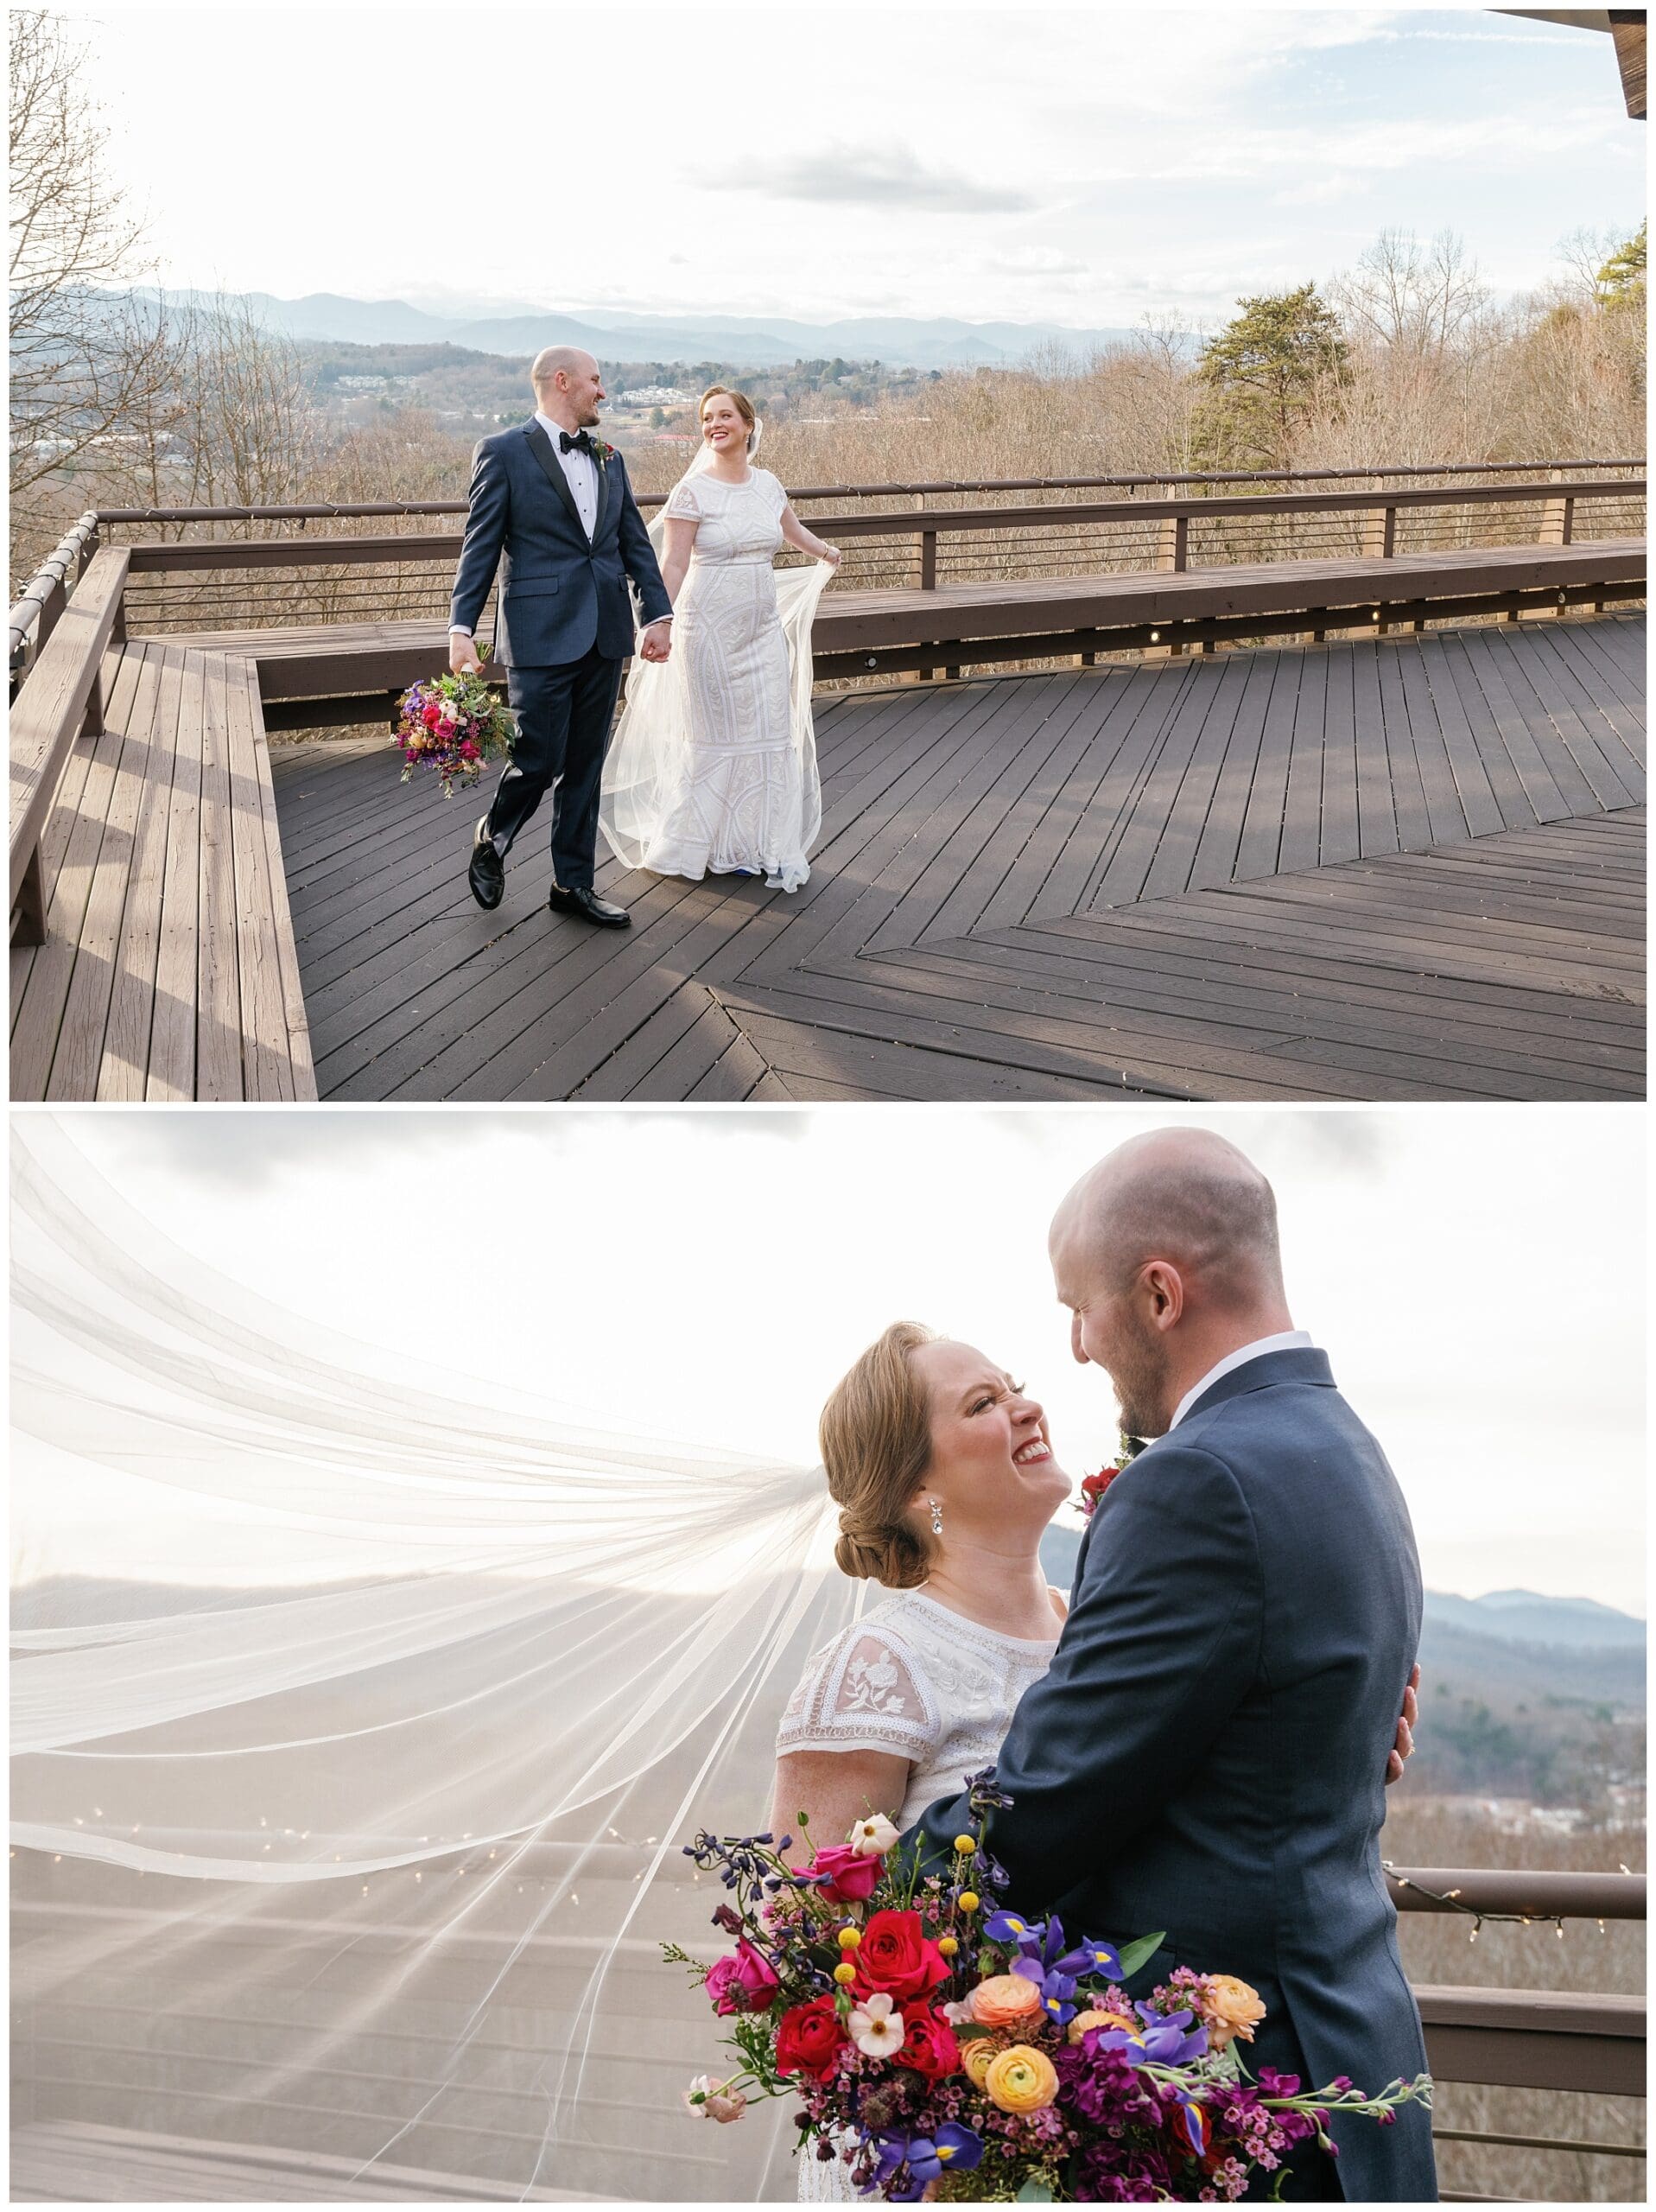 A bride and groom standing on a deck with mountains in the background.